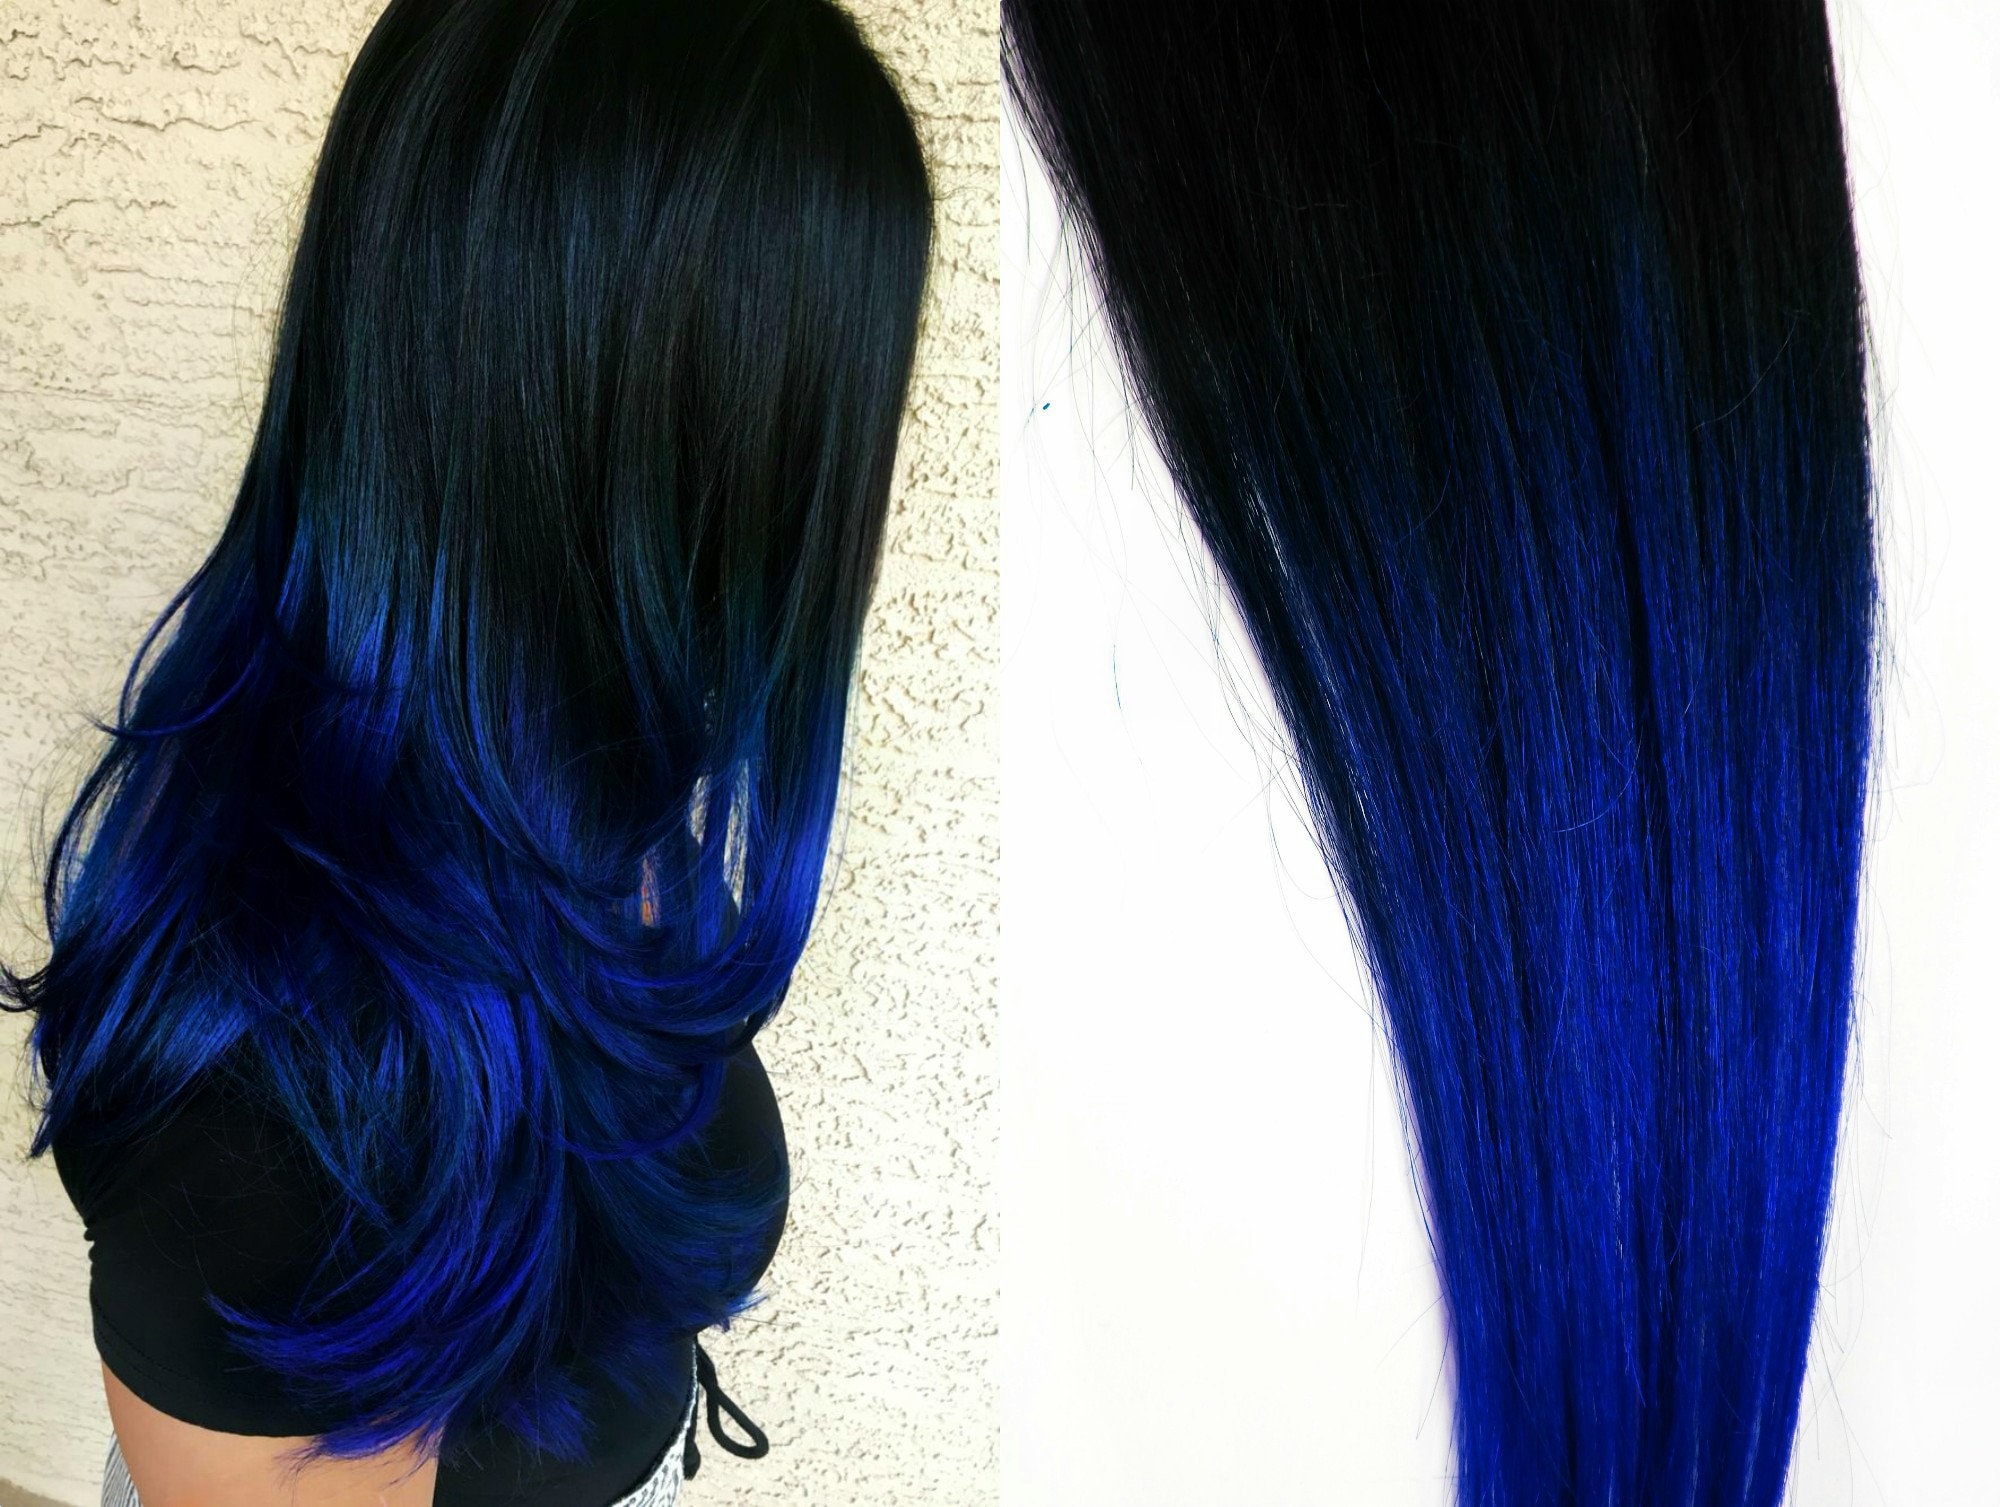 Orange and Blue Hair Extensions - wide 9